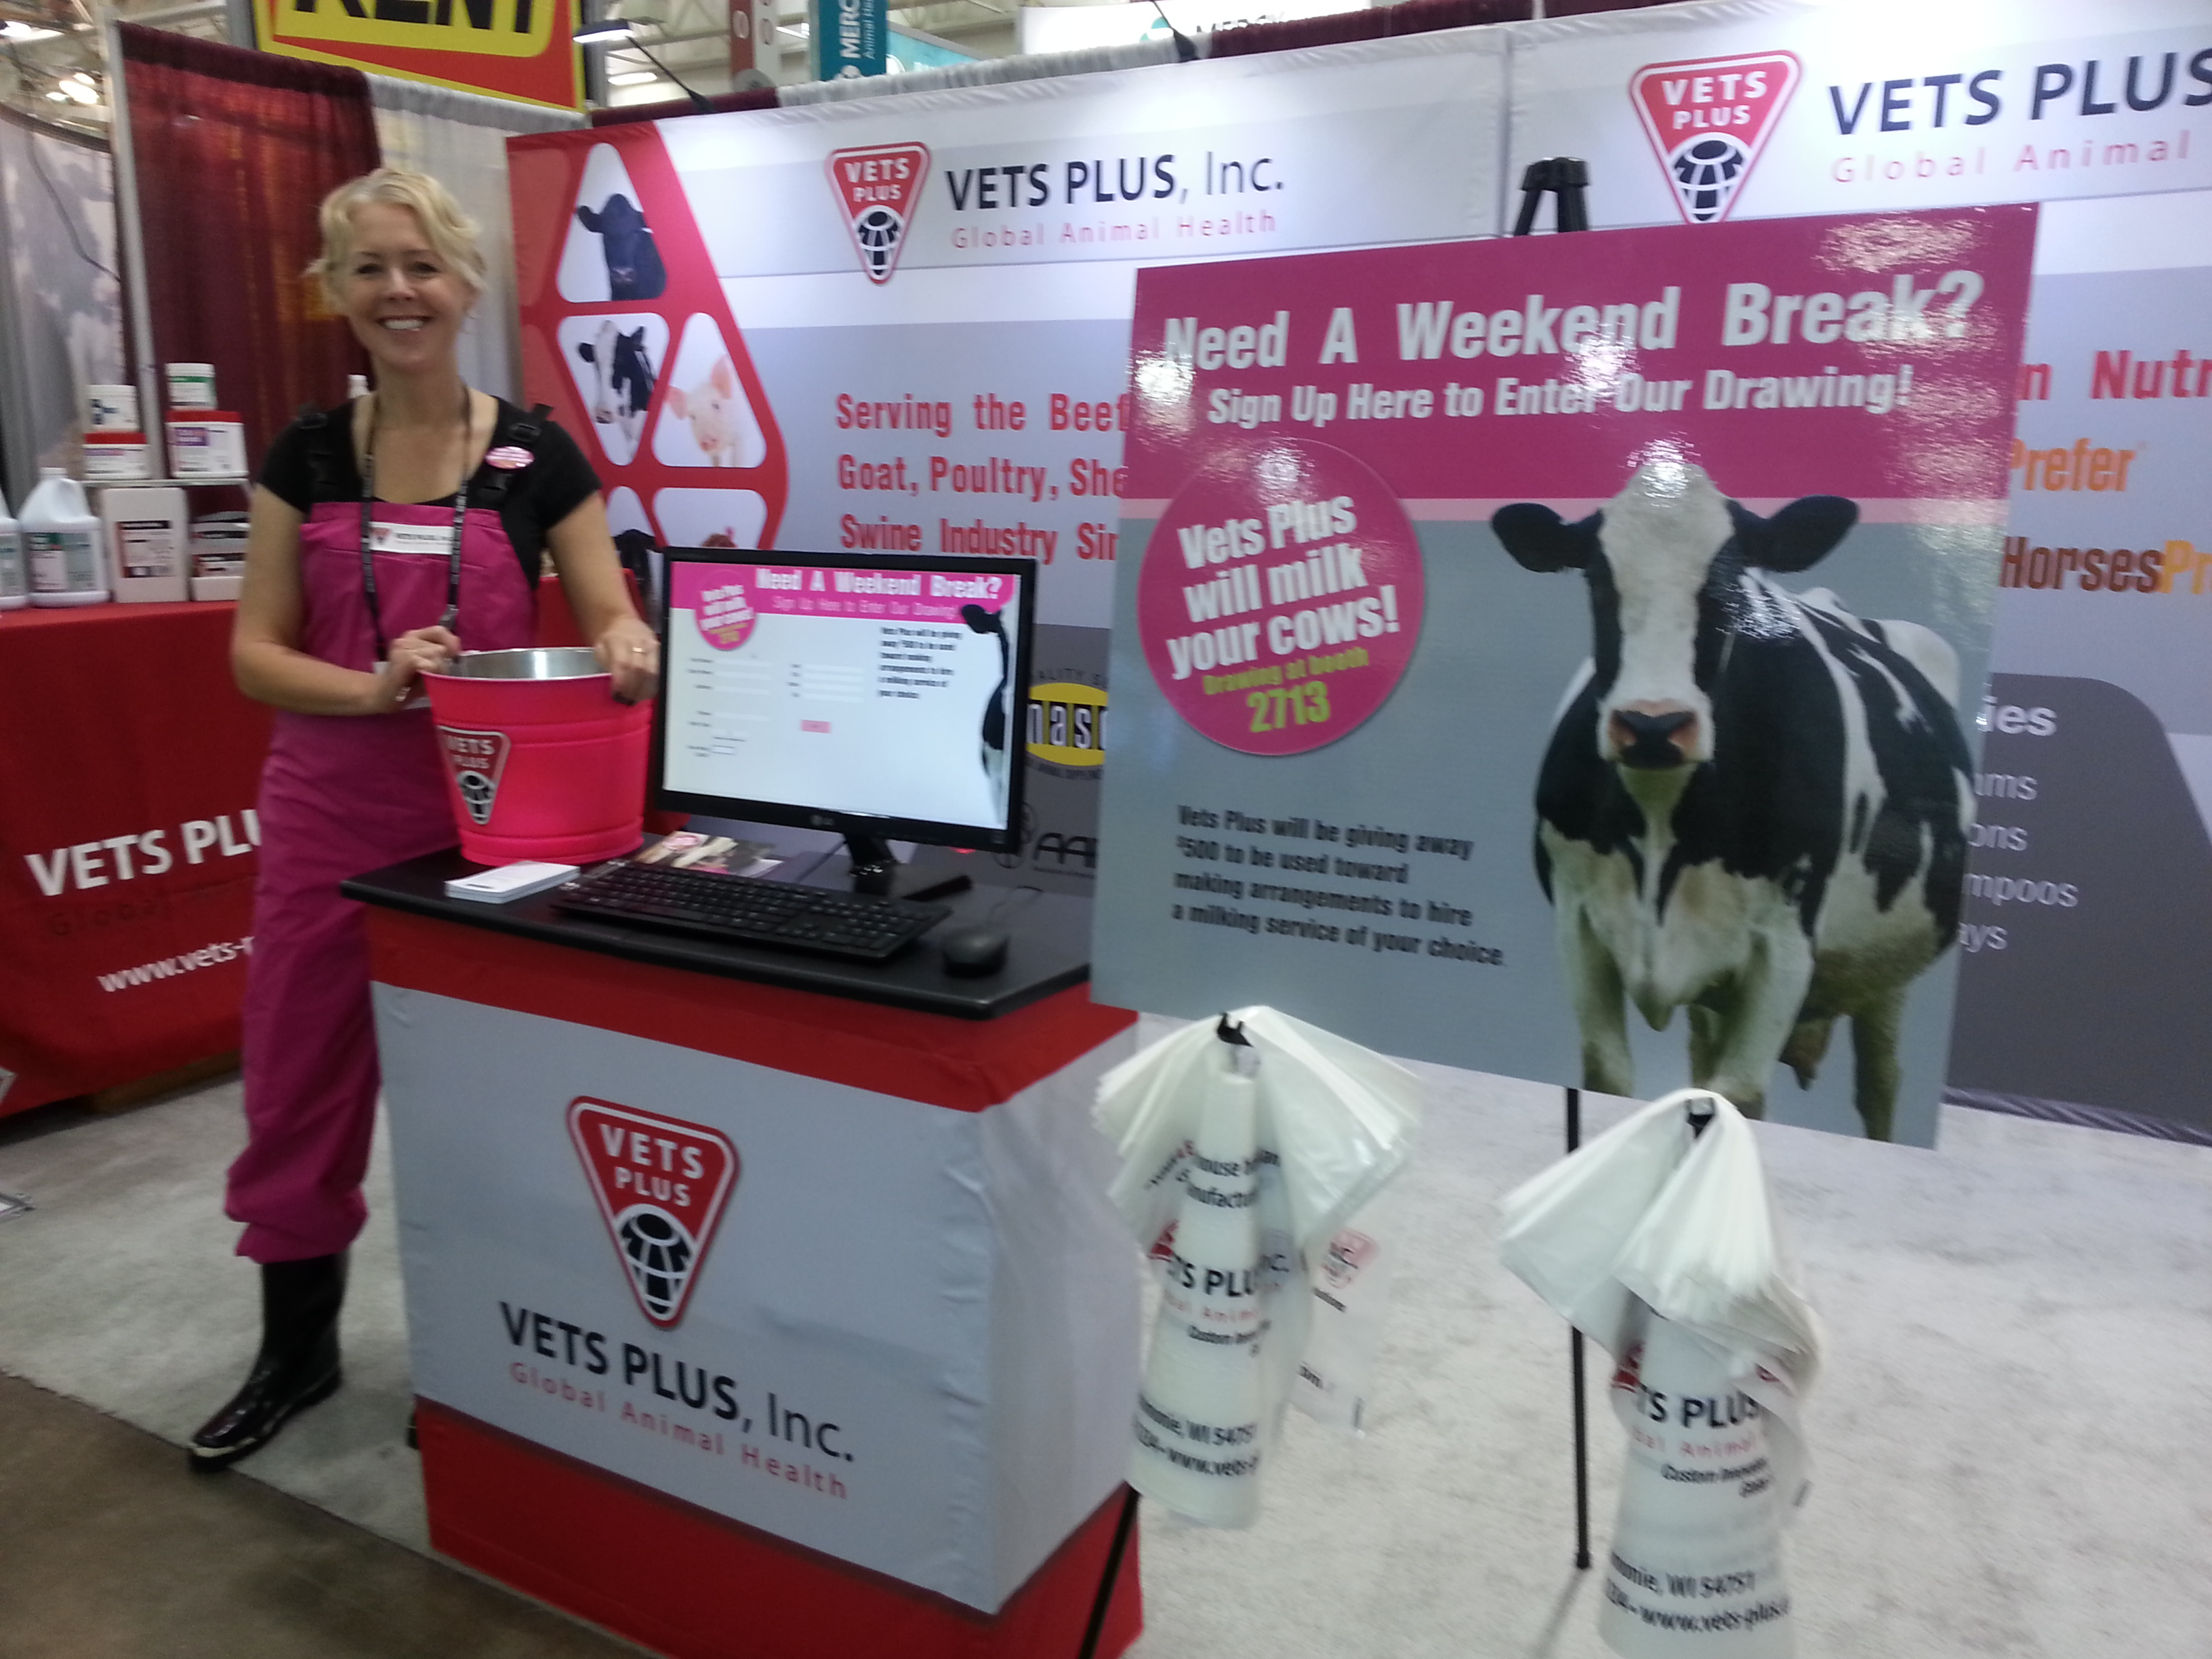 Lori Mirmesdagh at the Vets Plus, Inc. booth during World Dairy Expo